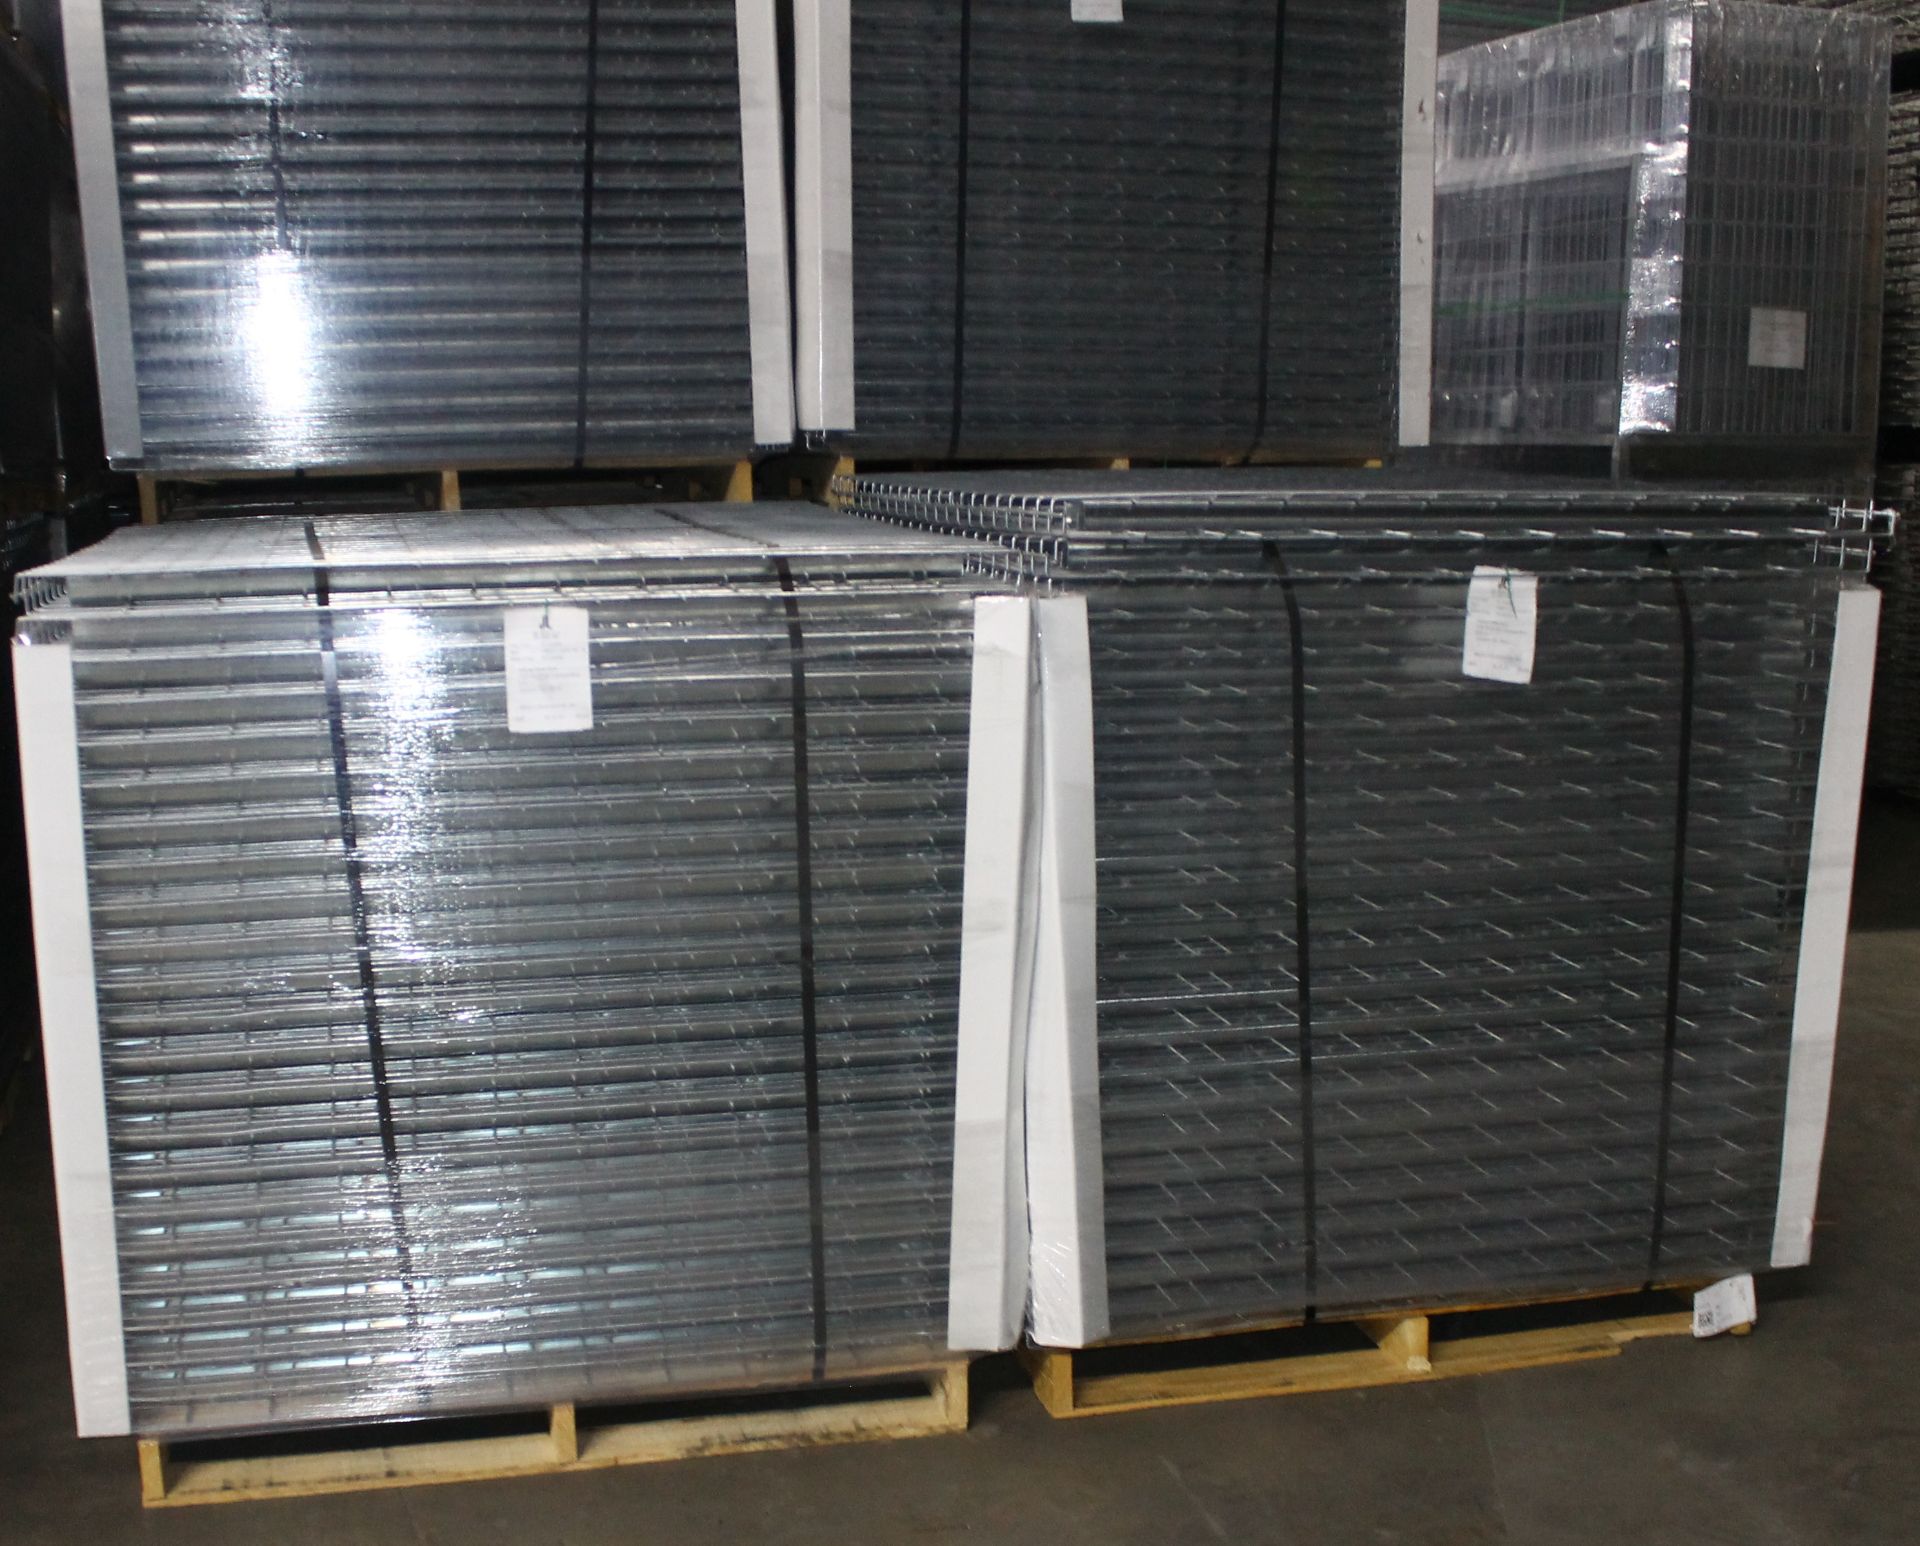 NEW 80 PCS OF STANDARD 48" X 46" WIREDECK - 1900 LBS CAPACITY